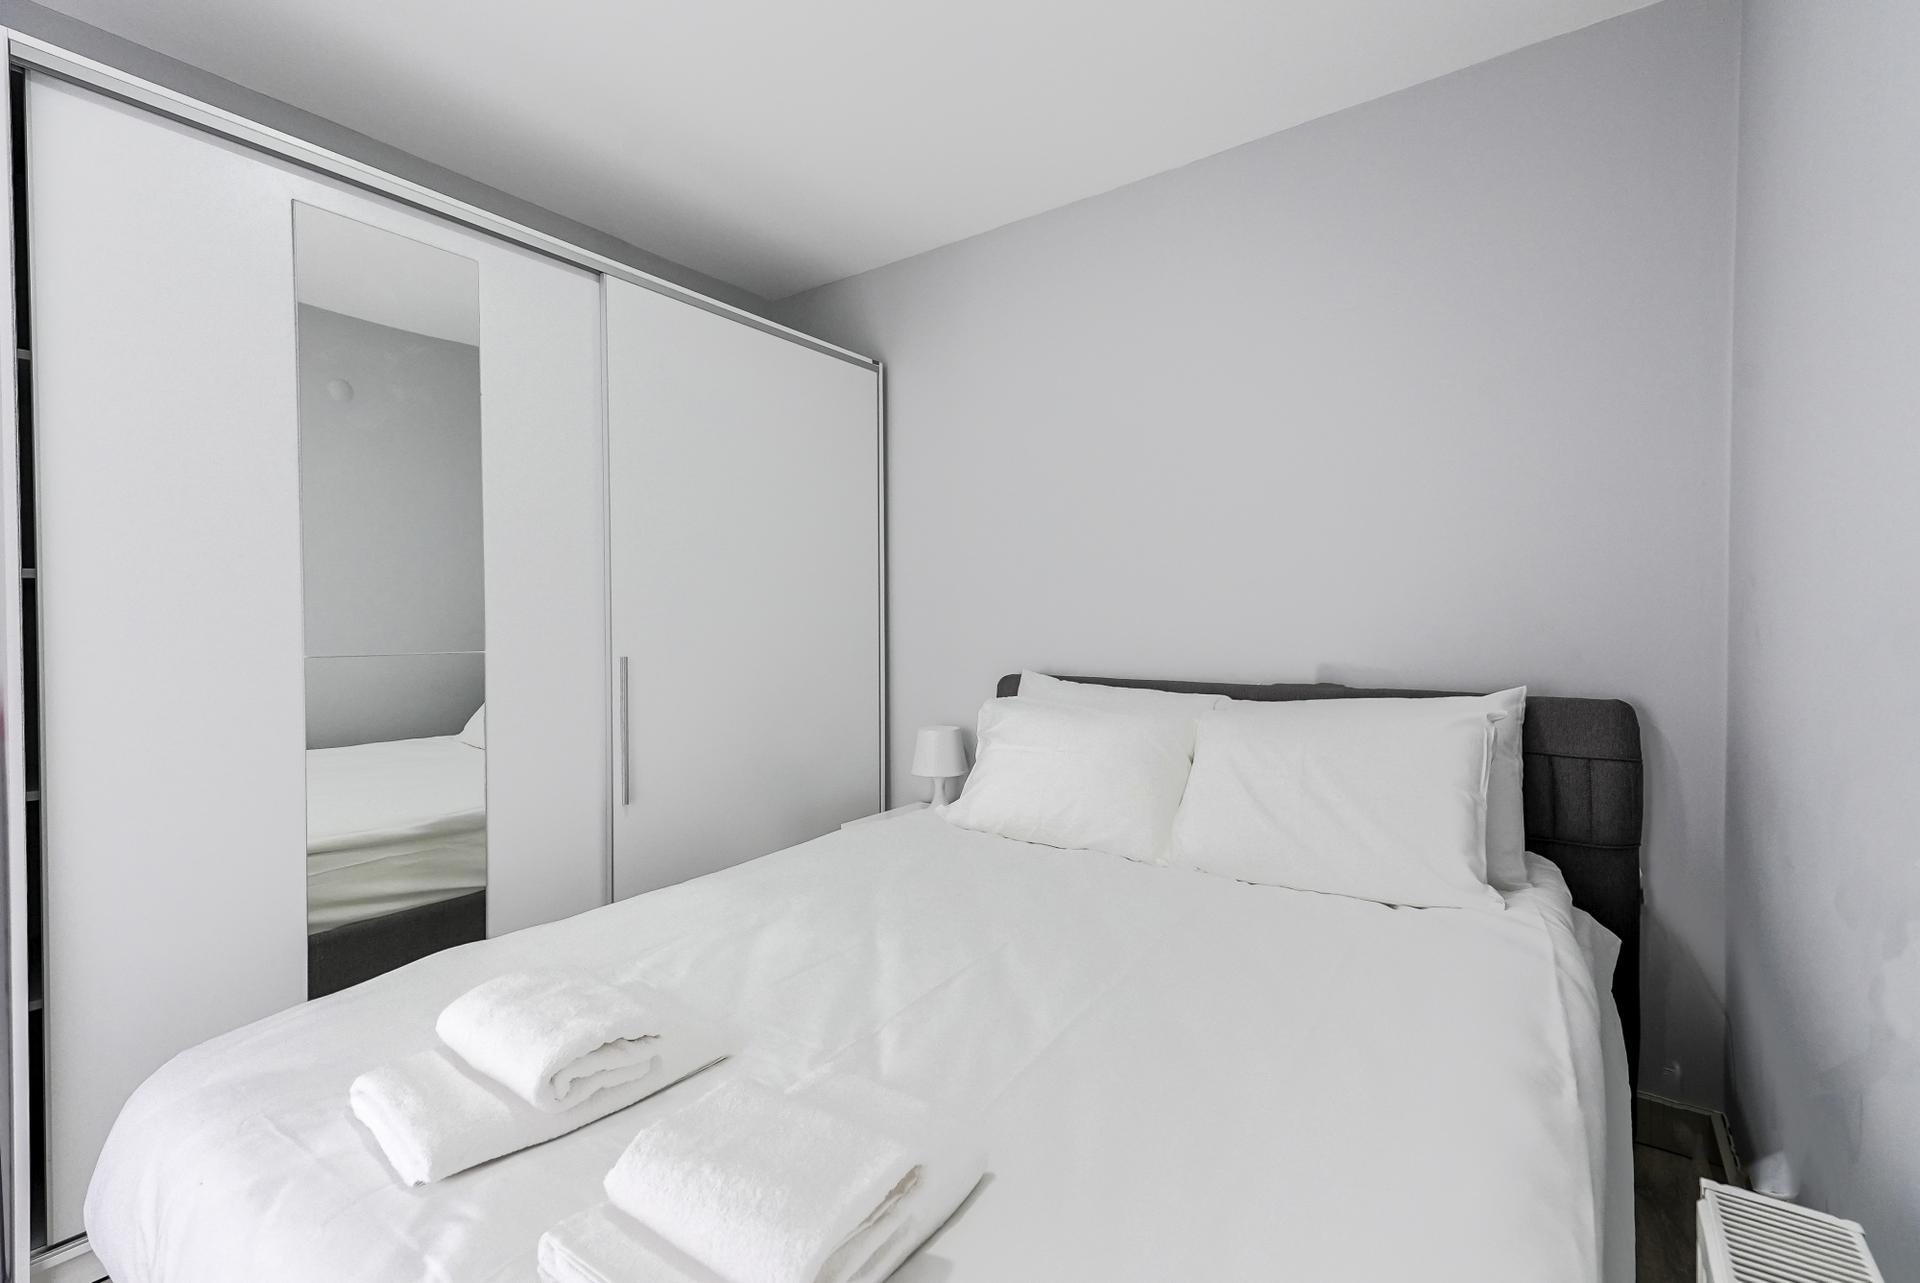 You are invited to have a peaceful sleep surrounded with divine white in the bedroom.